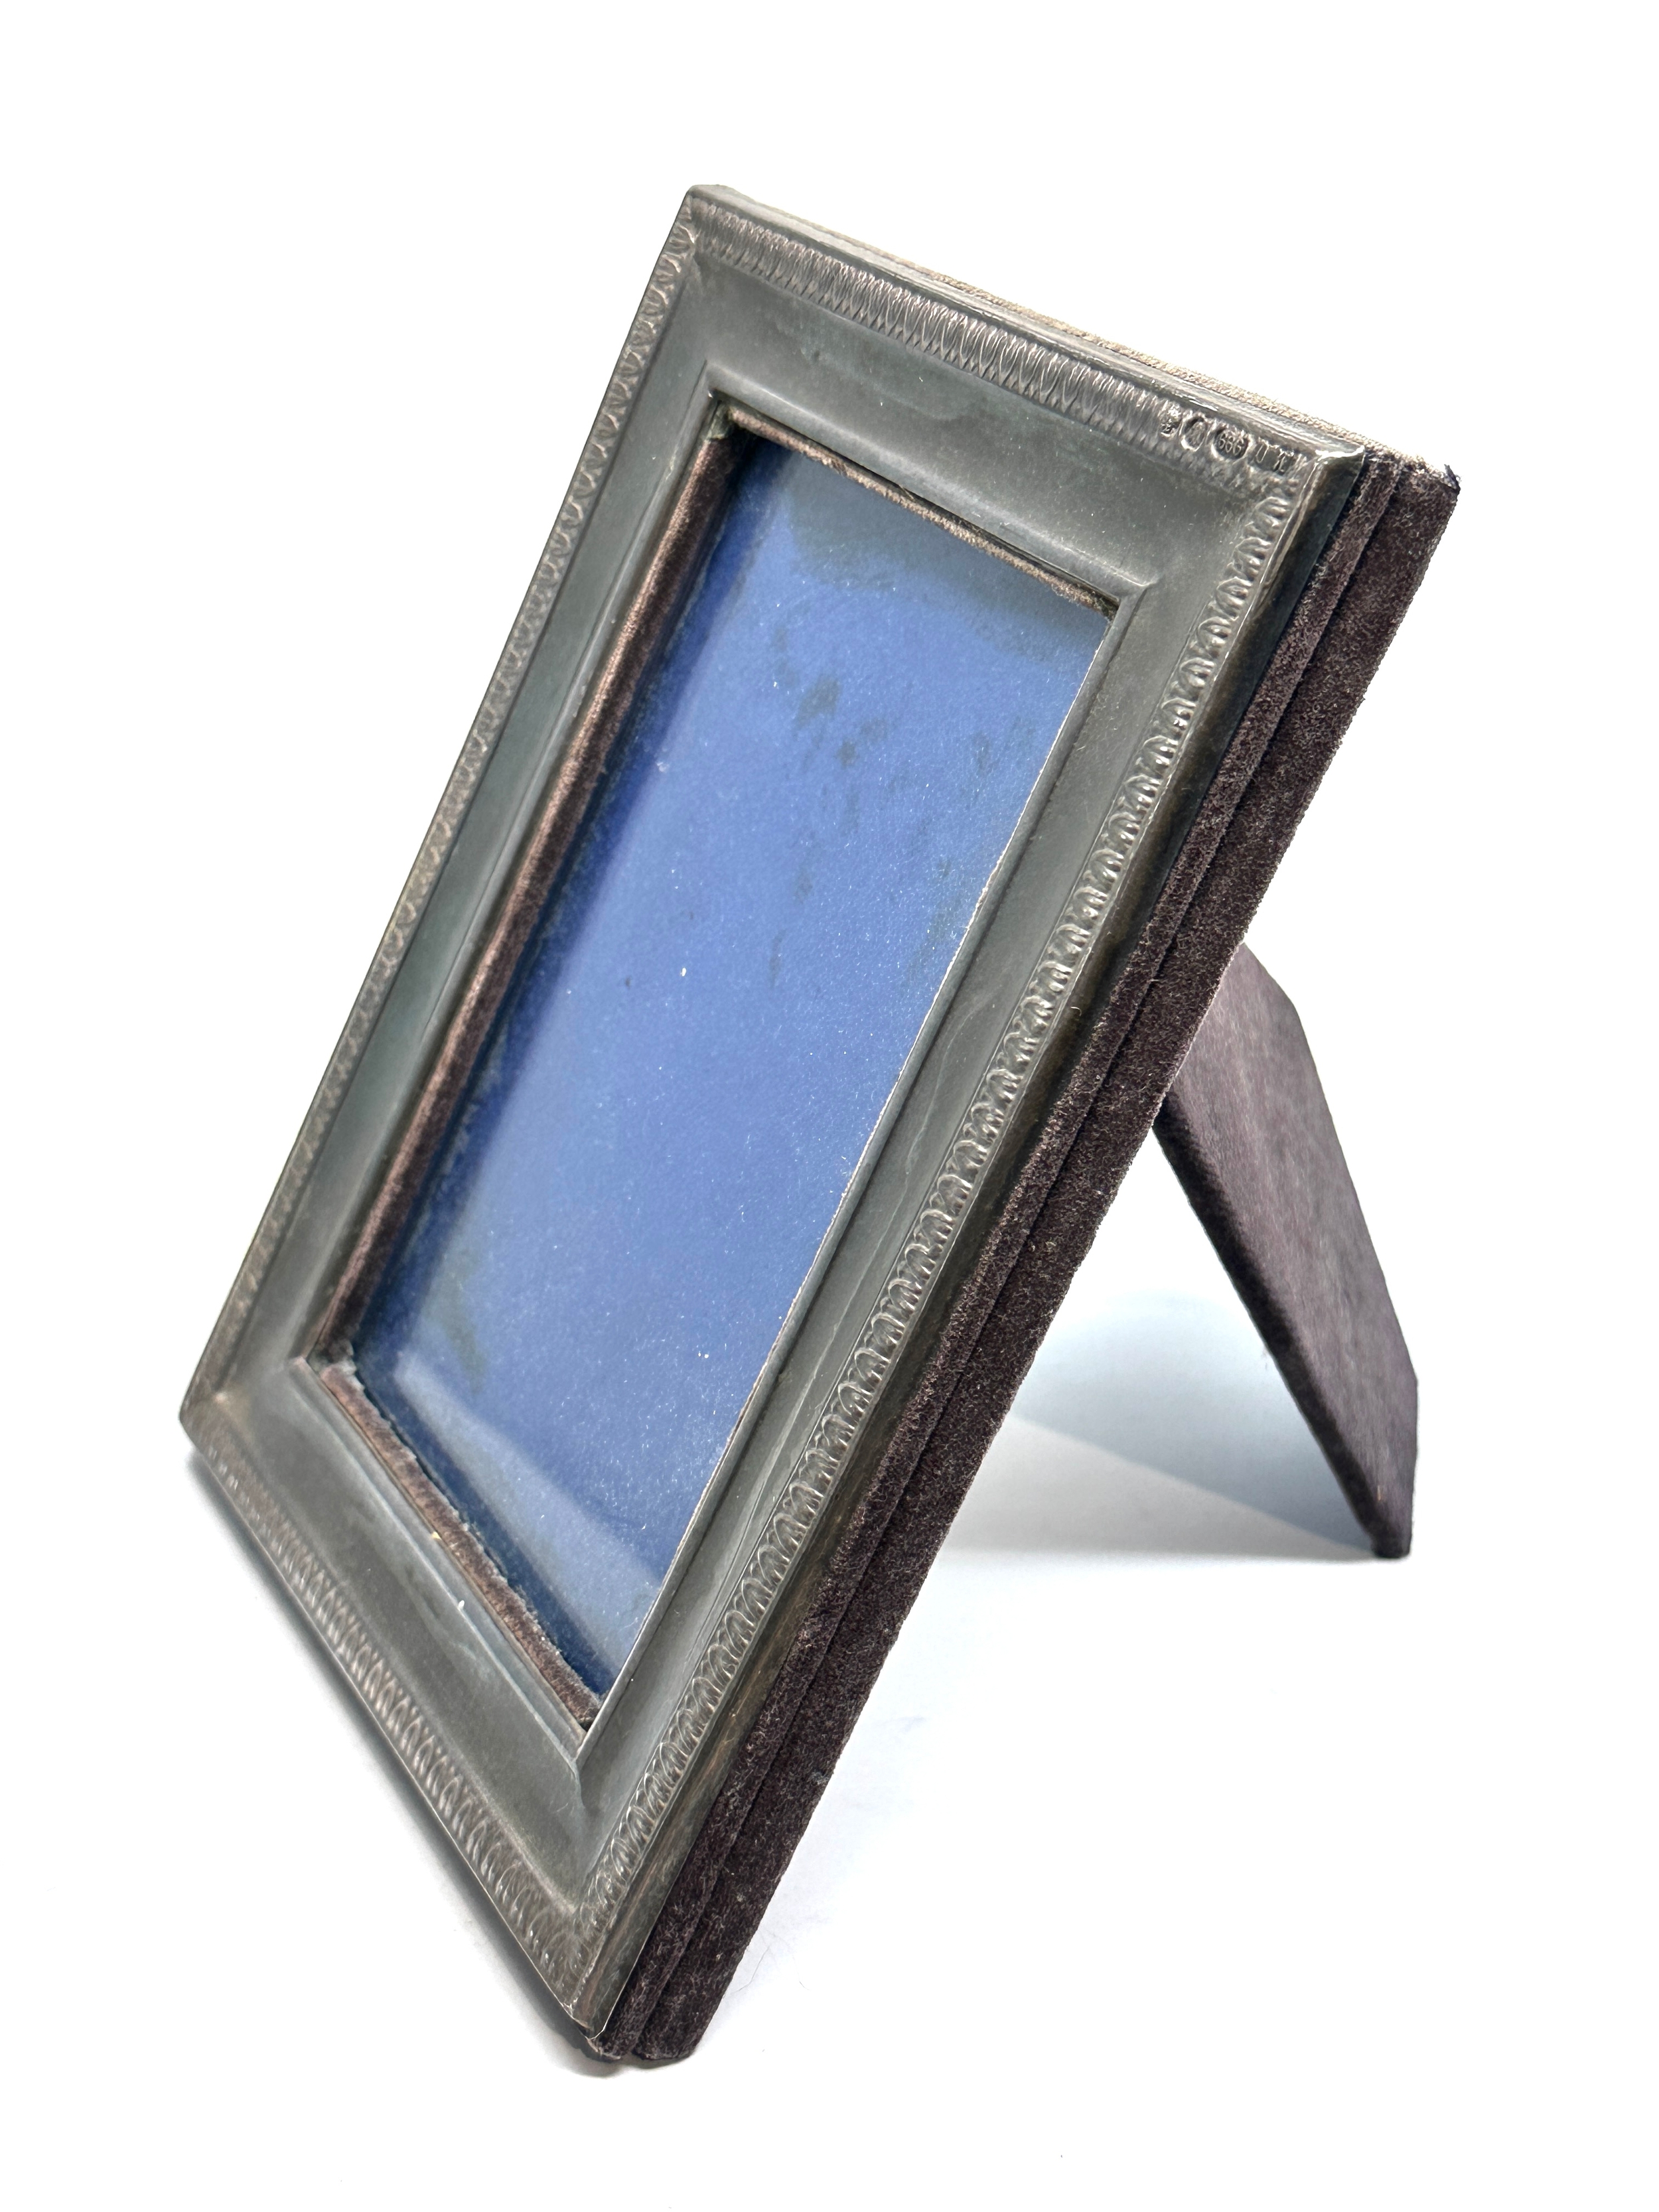 silver picture frame millenium silver hallmarks measures approx 19.5 by 14.5cm - Image 2 of 4